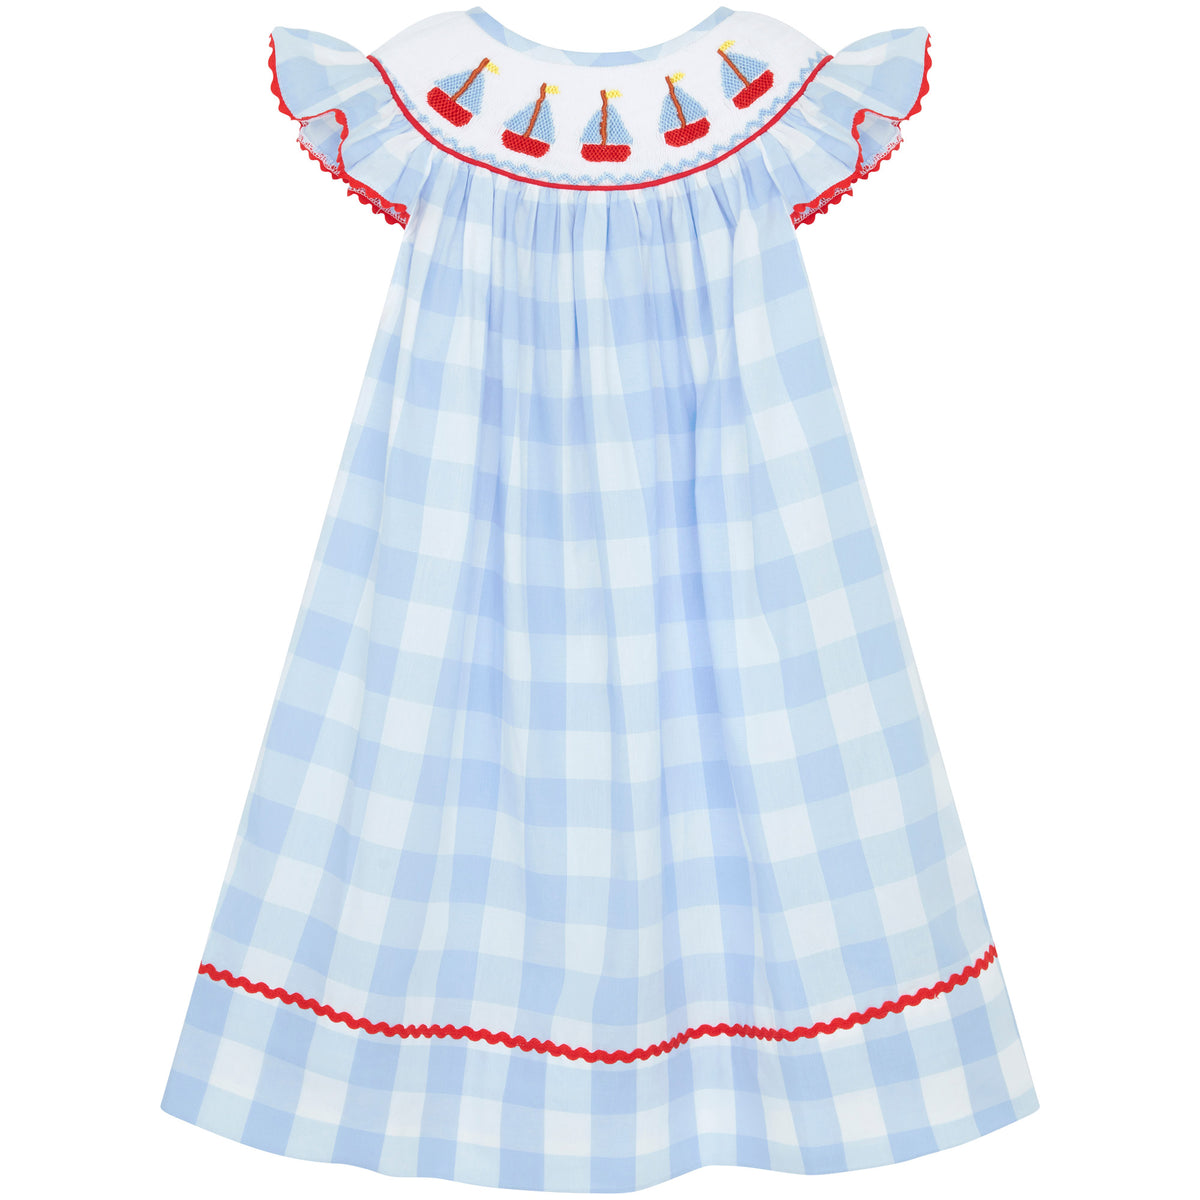 Little Princess Bella Hand Smocked Embroidered Sails Cotton Girls Dress Blue White Red | Holly Hastie London